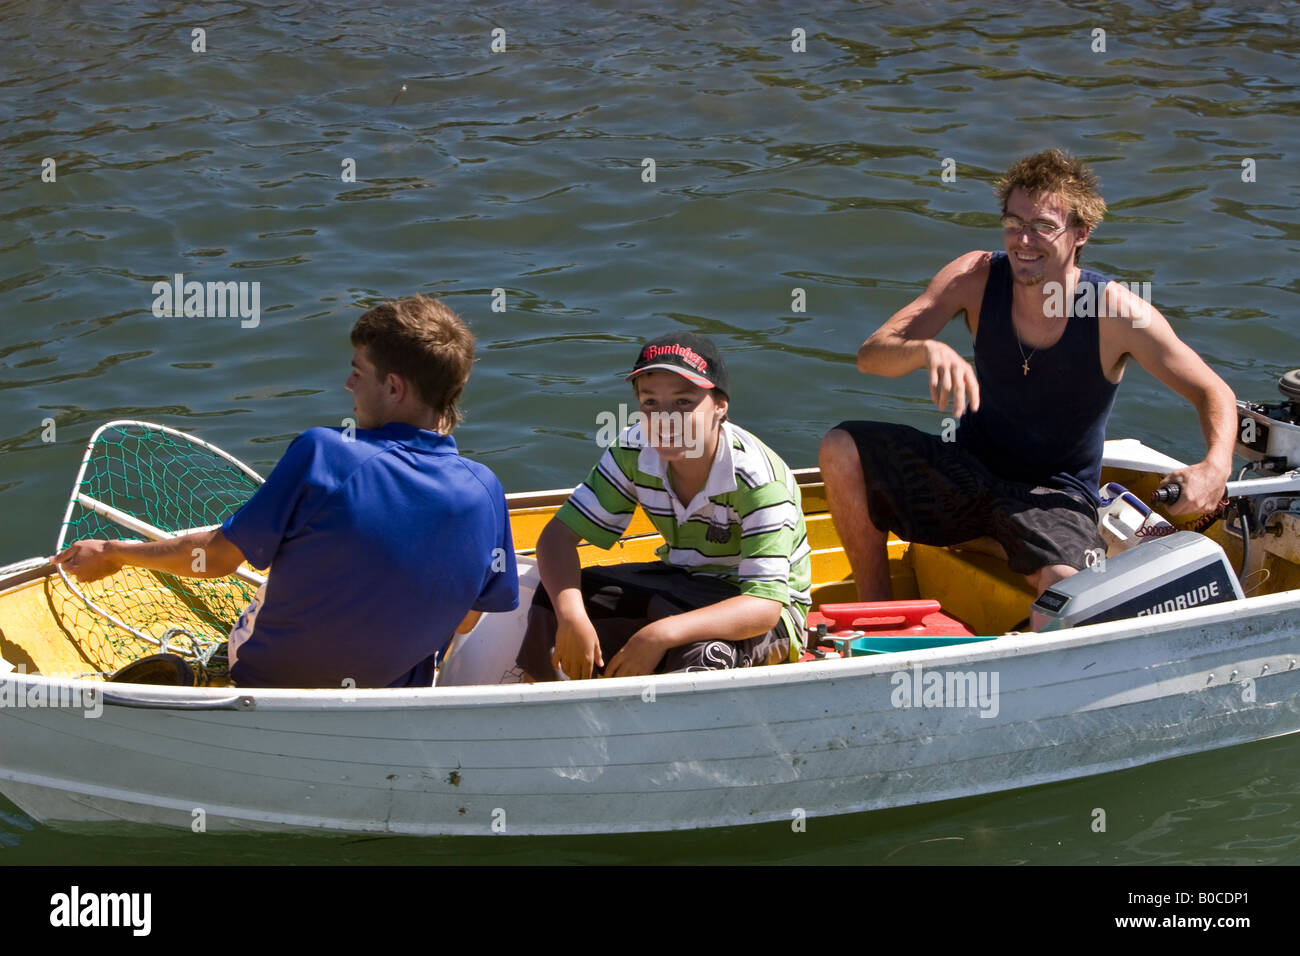 3 people out fishing Stock Photo - Alamy